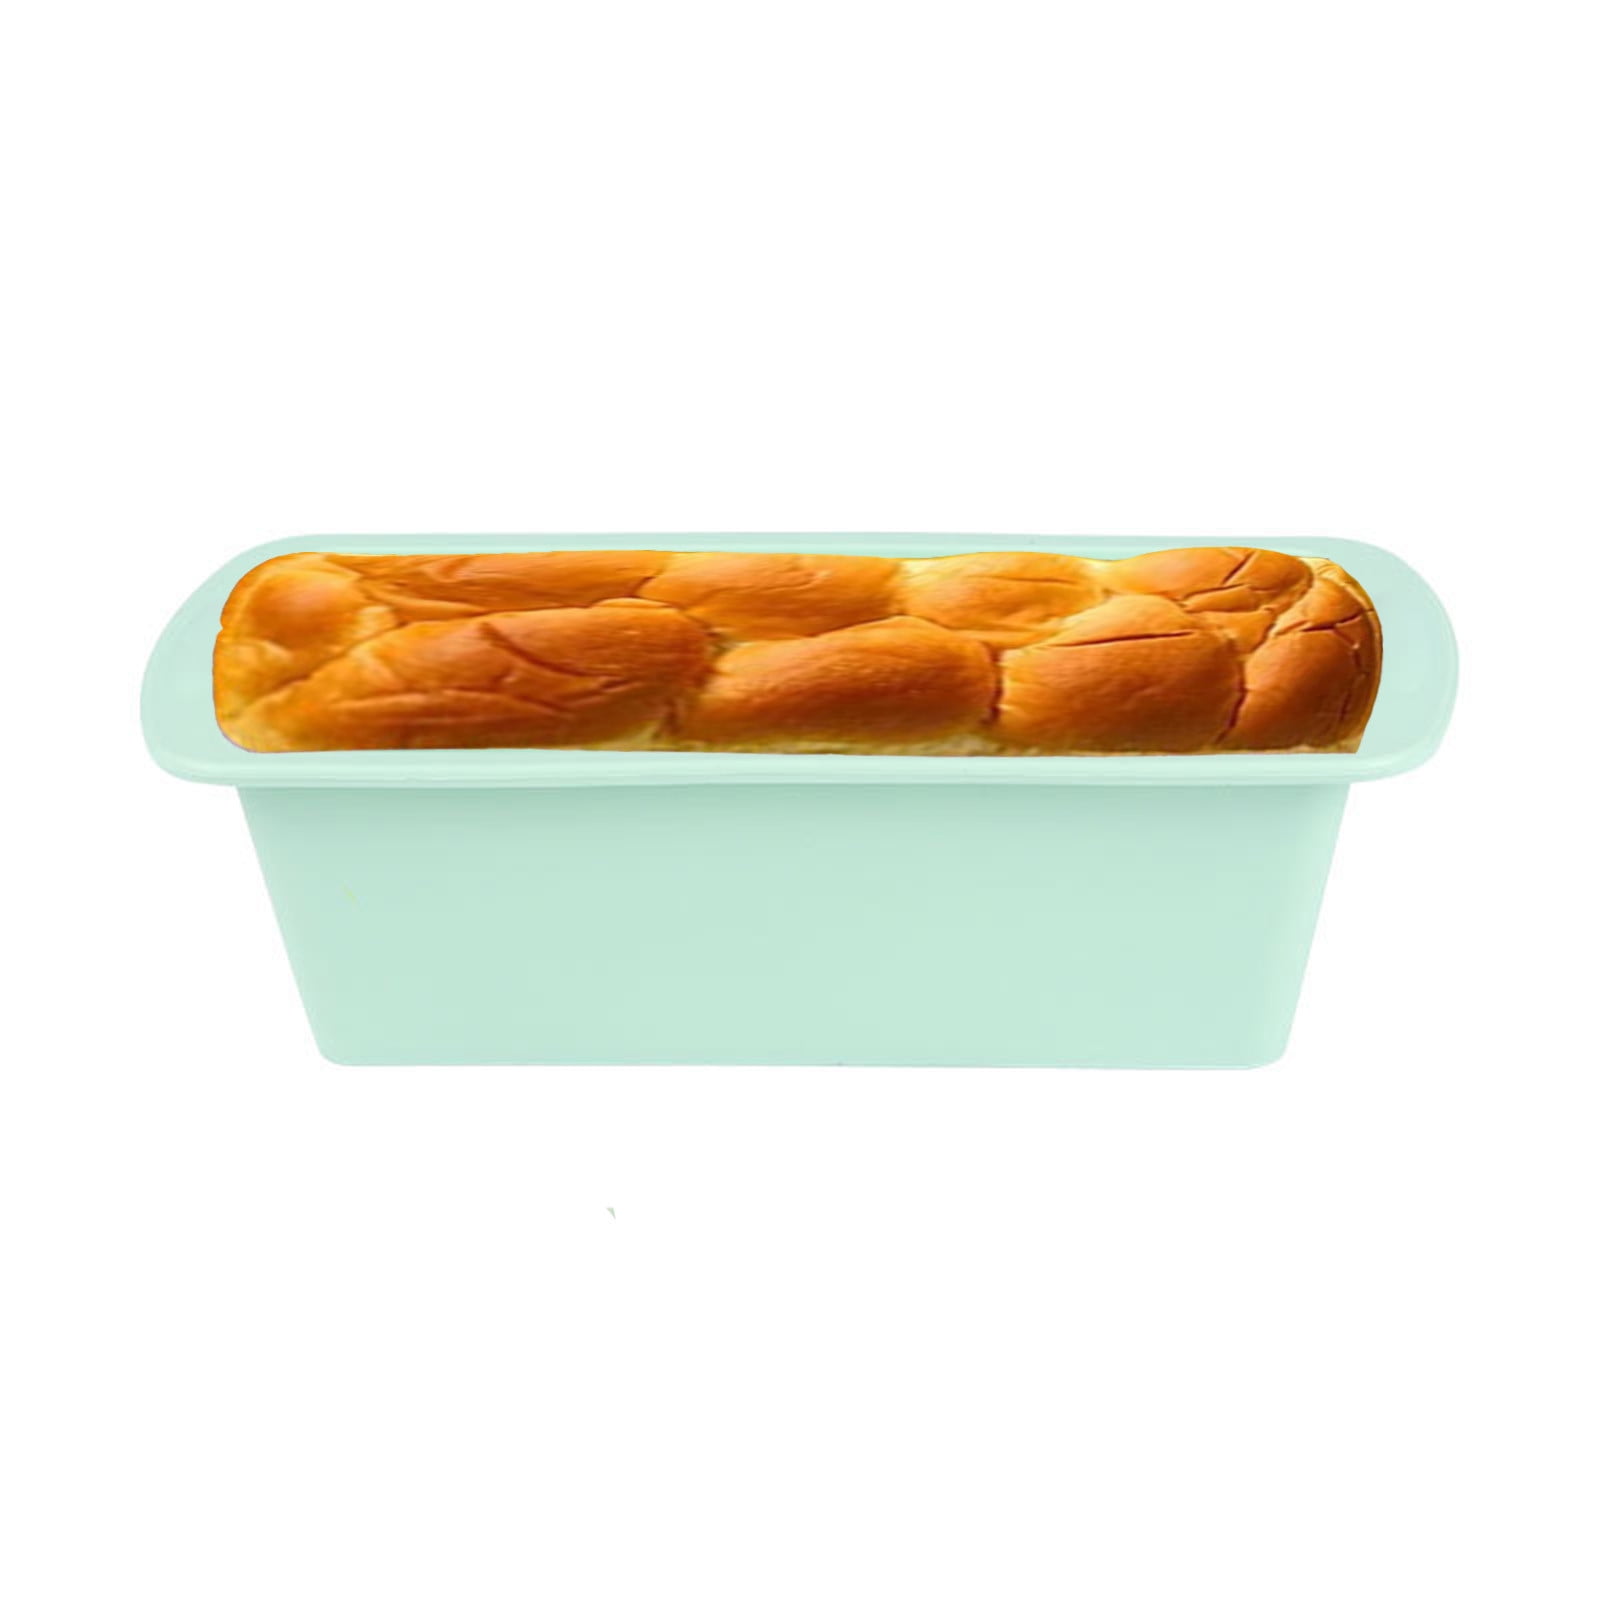 2 Pieces Silicone Loaf Pan Silicone Bread Loaf Cake Mold - Casewin Nonstick Silicone  Loaf Baking Pan for Homemade Cake, Break, Meatloaf, Quiche 